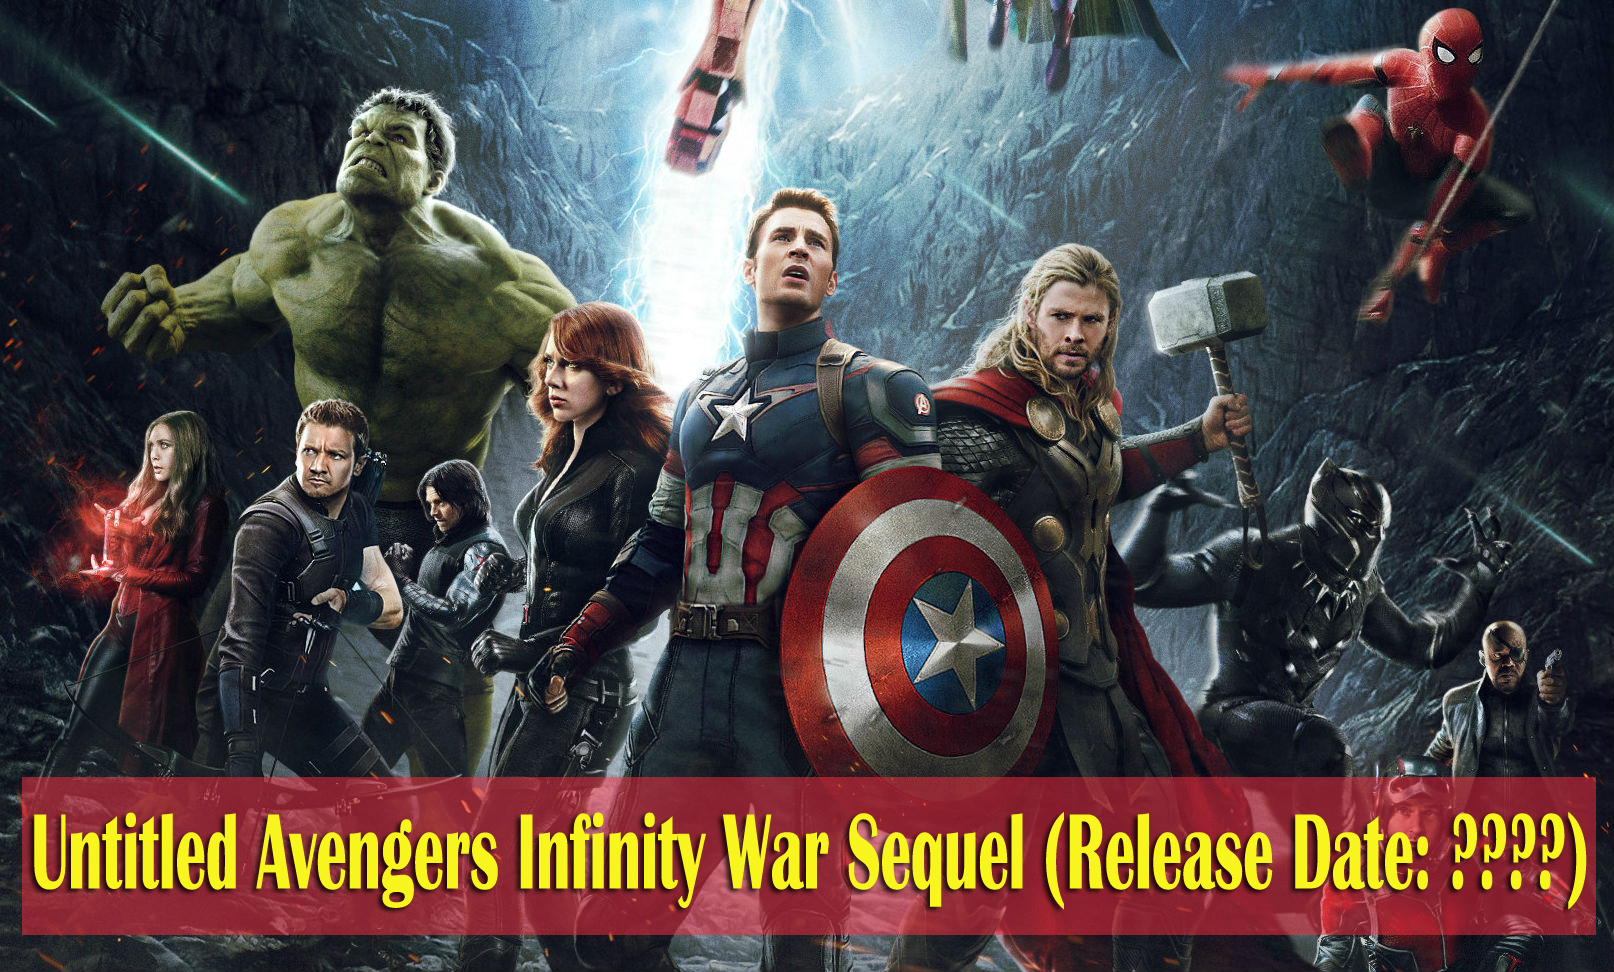 Top 10 most promising upcoming Marvel movies | Check release dates